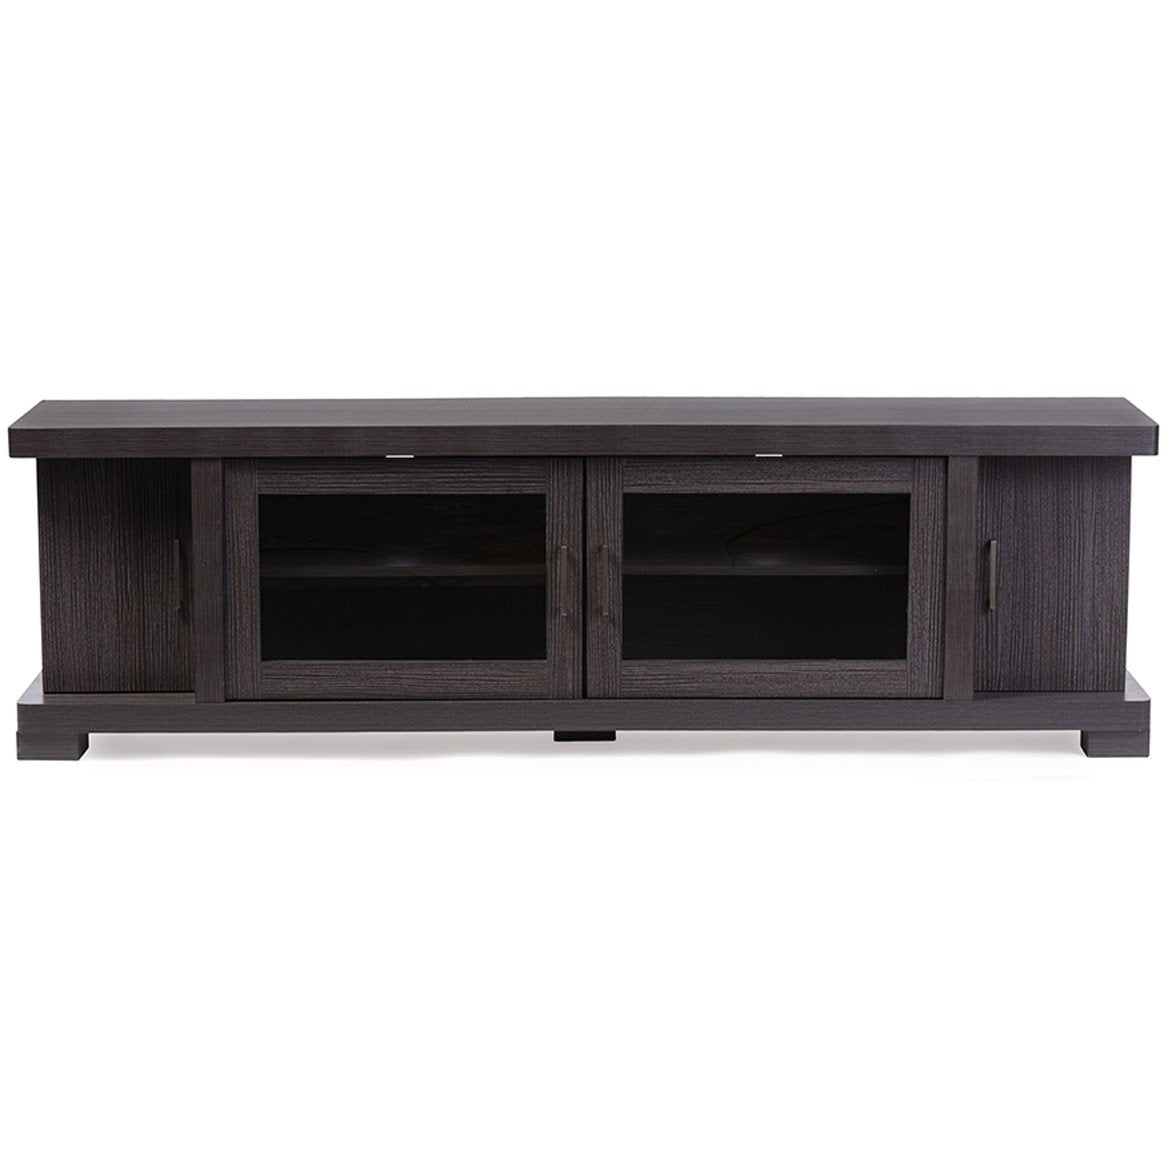 Baxton Studio Viveka 70-Inch Dark Brown Wood TV Cabinet with 2 Glass Doors and 2 Doors Baxton Studio-TV Stands-Minimal And Modern - 1